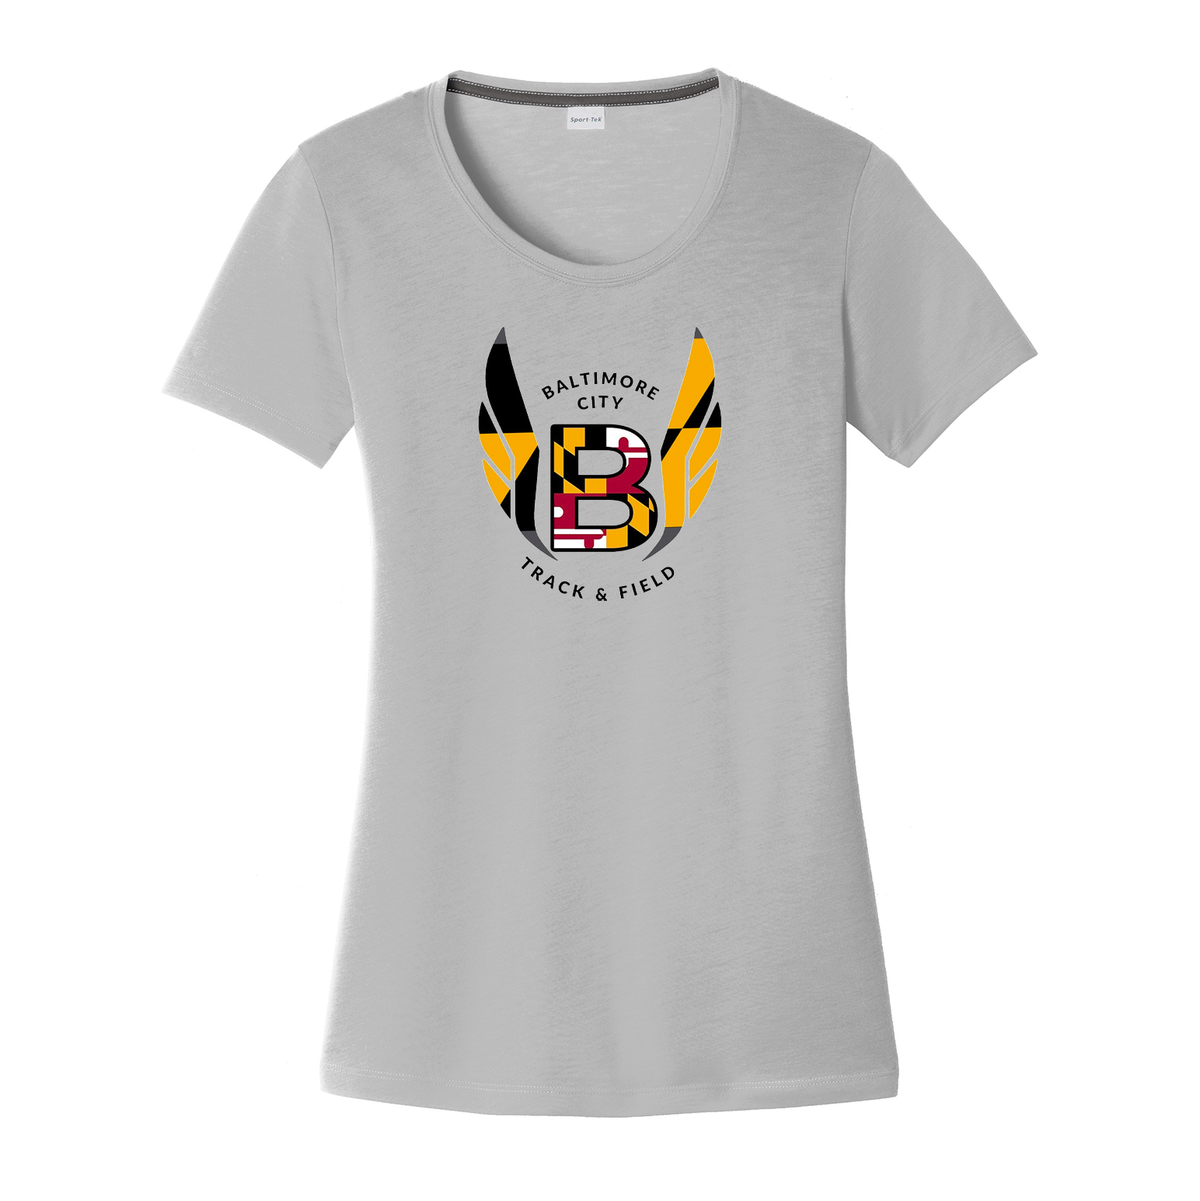 Baltimore City Track & Field Club Women's CottonTouch Performance T-Shirt